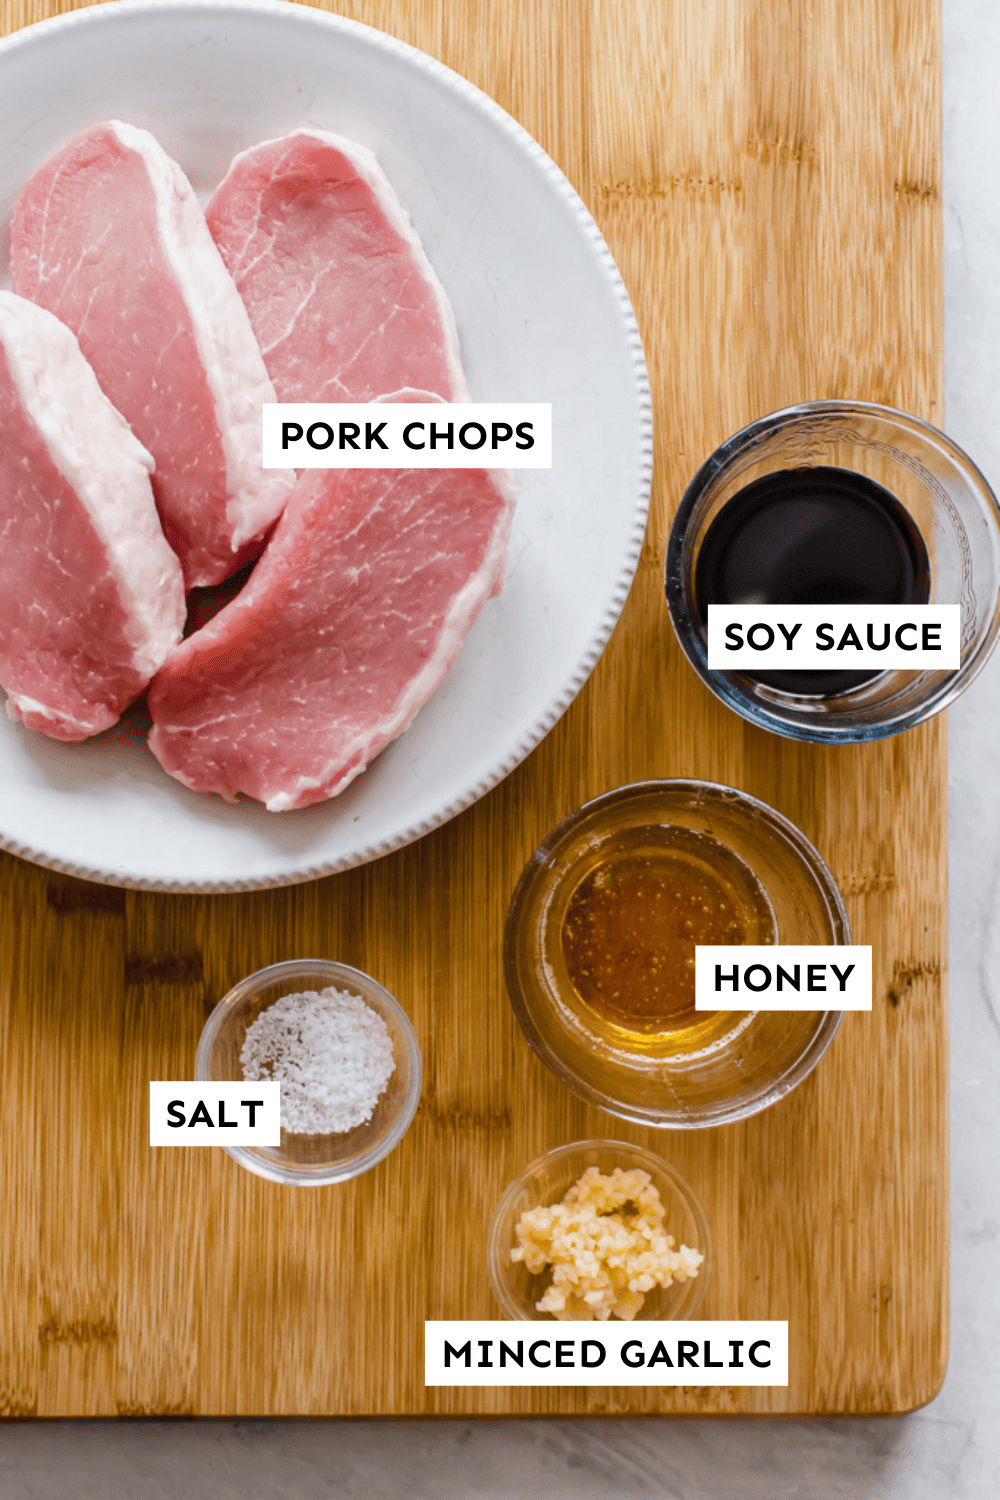 Sweet & Savory pork chop ingredients measured out in bowls sitting on a wooden cutting board and labeled.